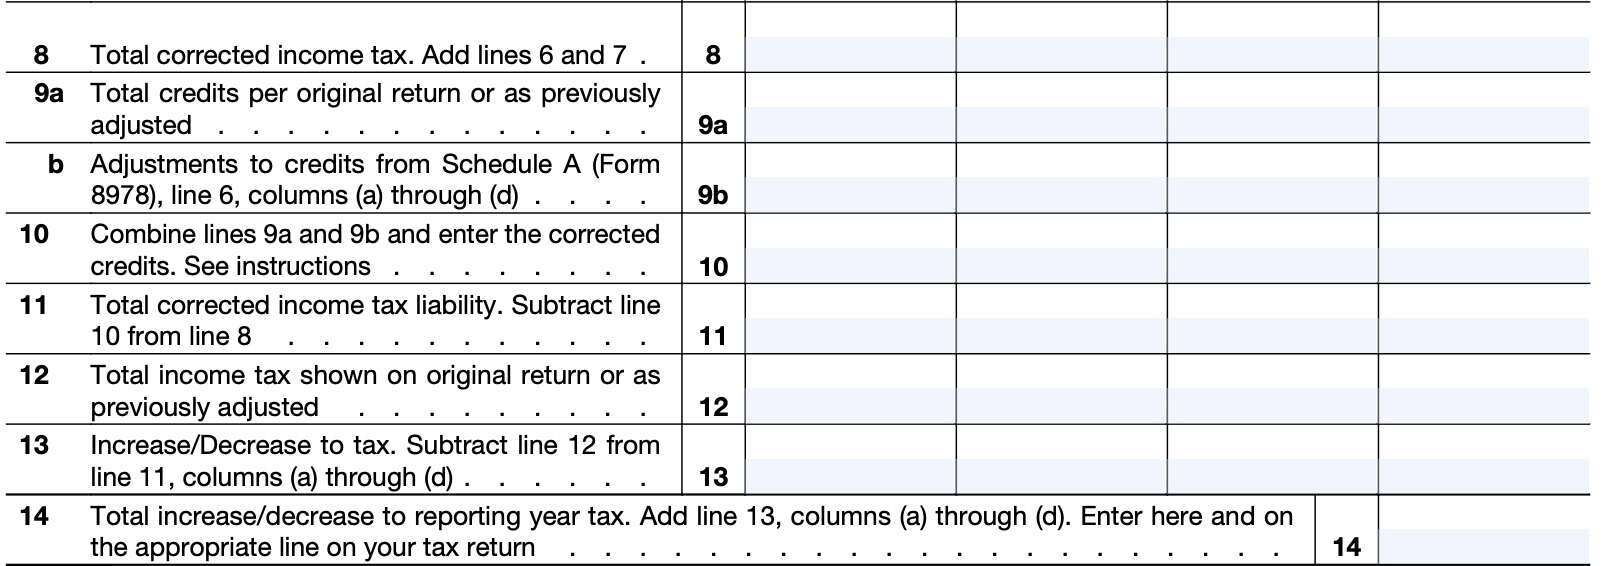 irs form 8978, part i, continued

